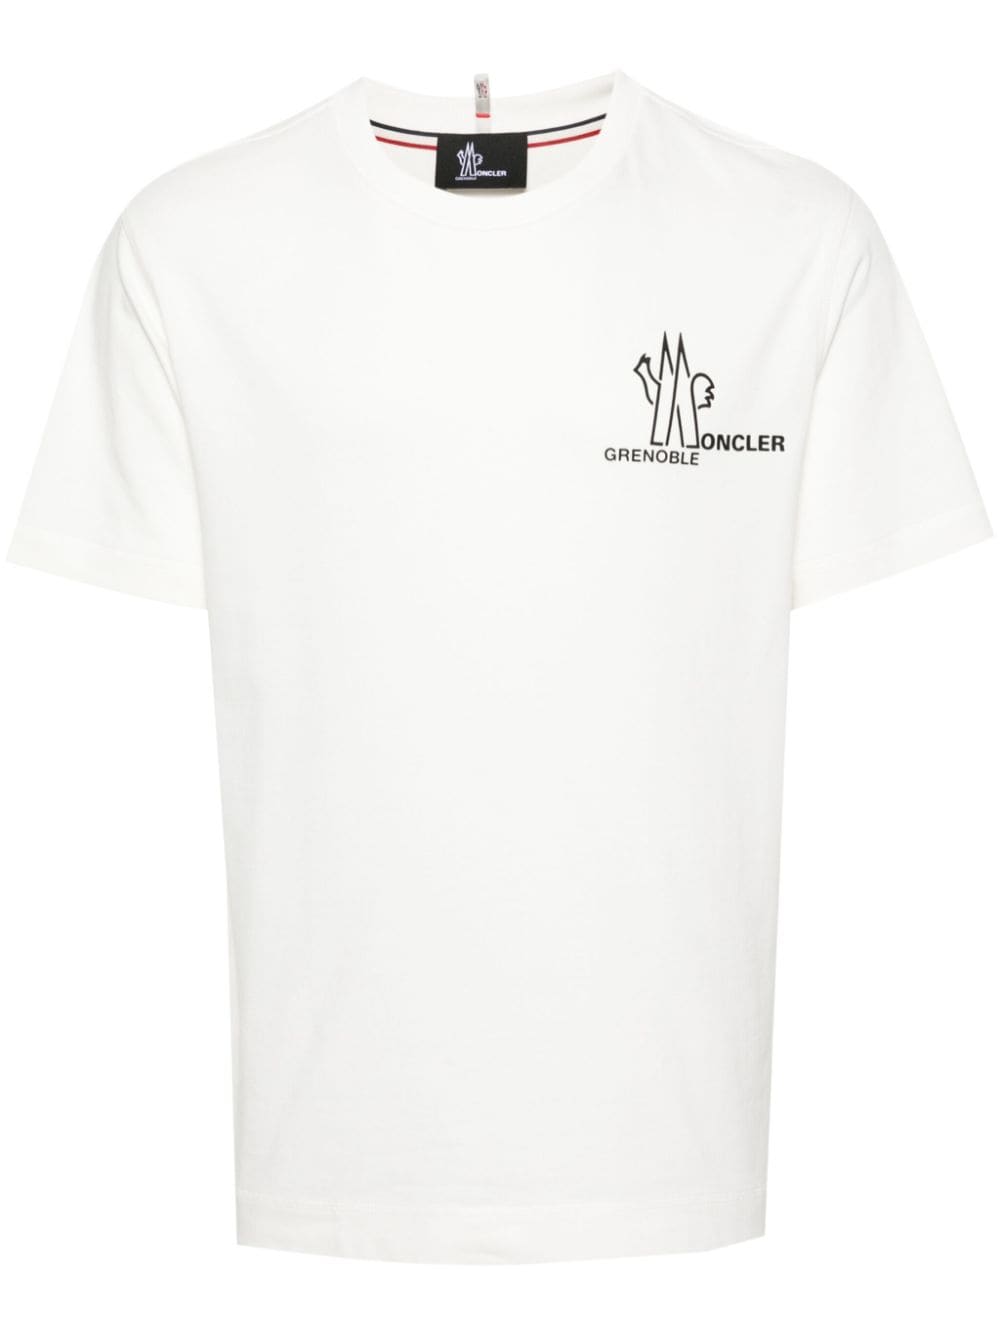 T-shirt bianca in cotone con stampa logo